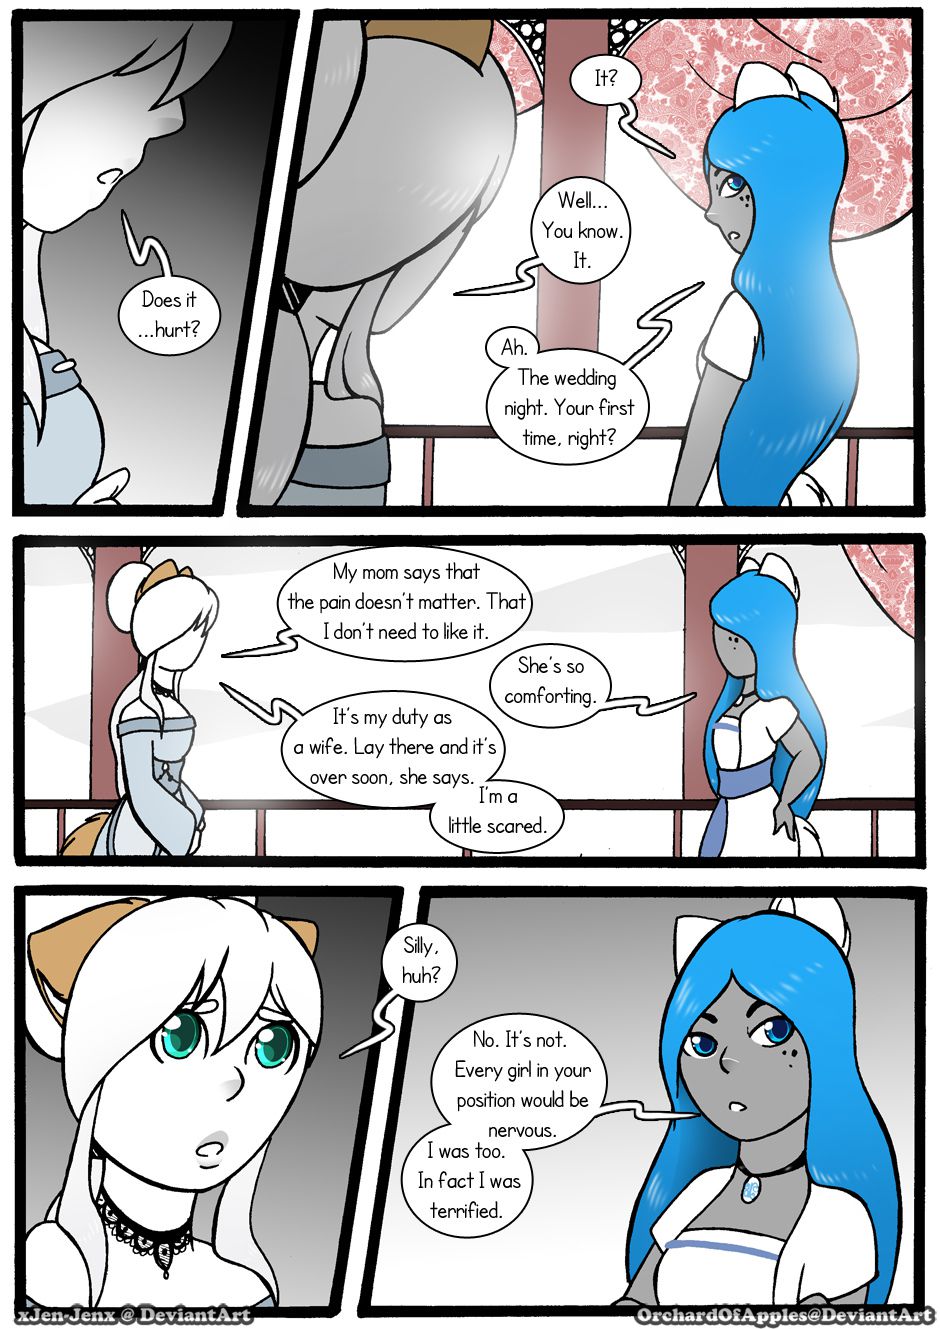 [Jeny-jen94] Between Kings and Queens [Ongoing] 214